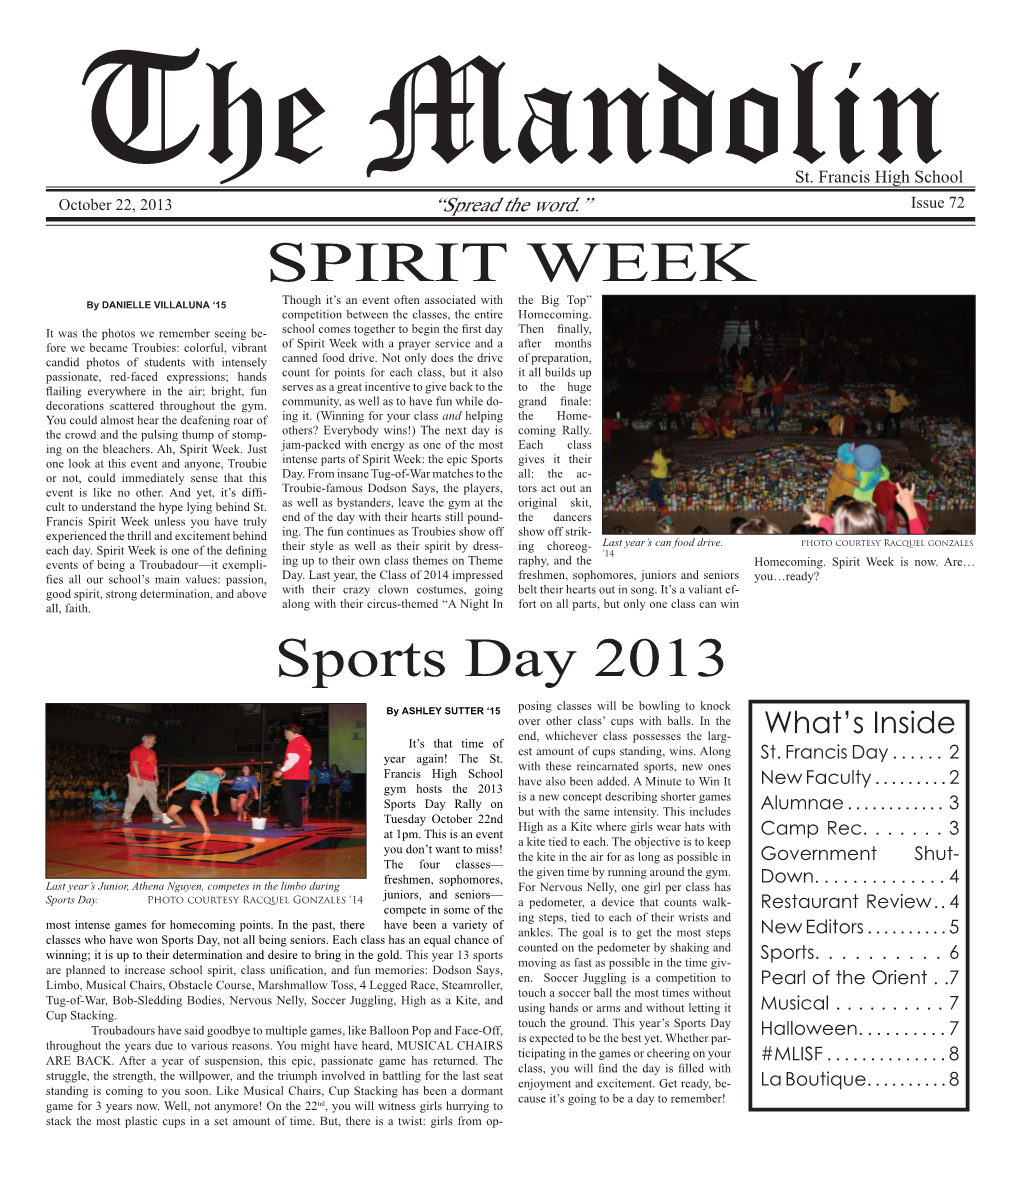 SPIRIT WEEK by DANIELLE VILLALUNA ‘15 Though It’S an Event Often Associated with the Big Top” Competition Between the Classes, the Entire Homecoming